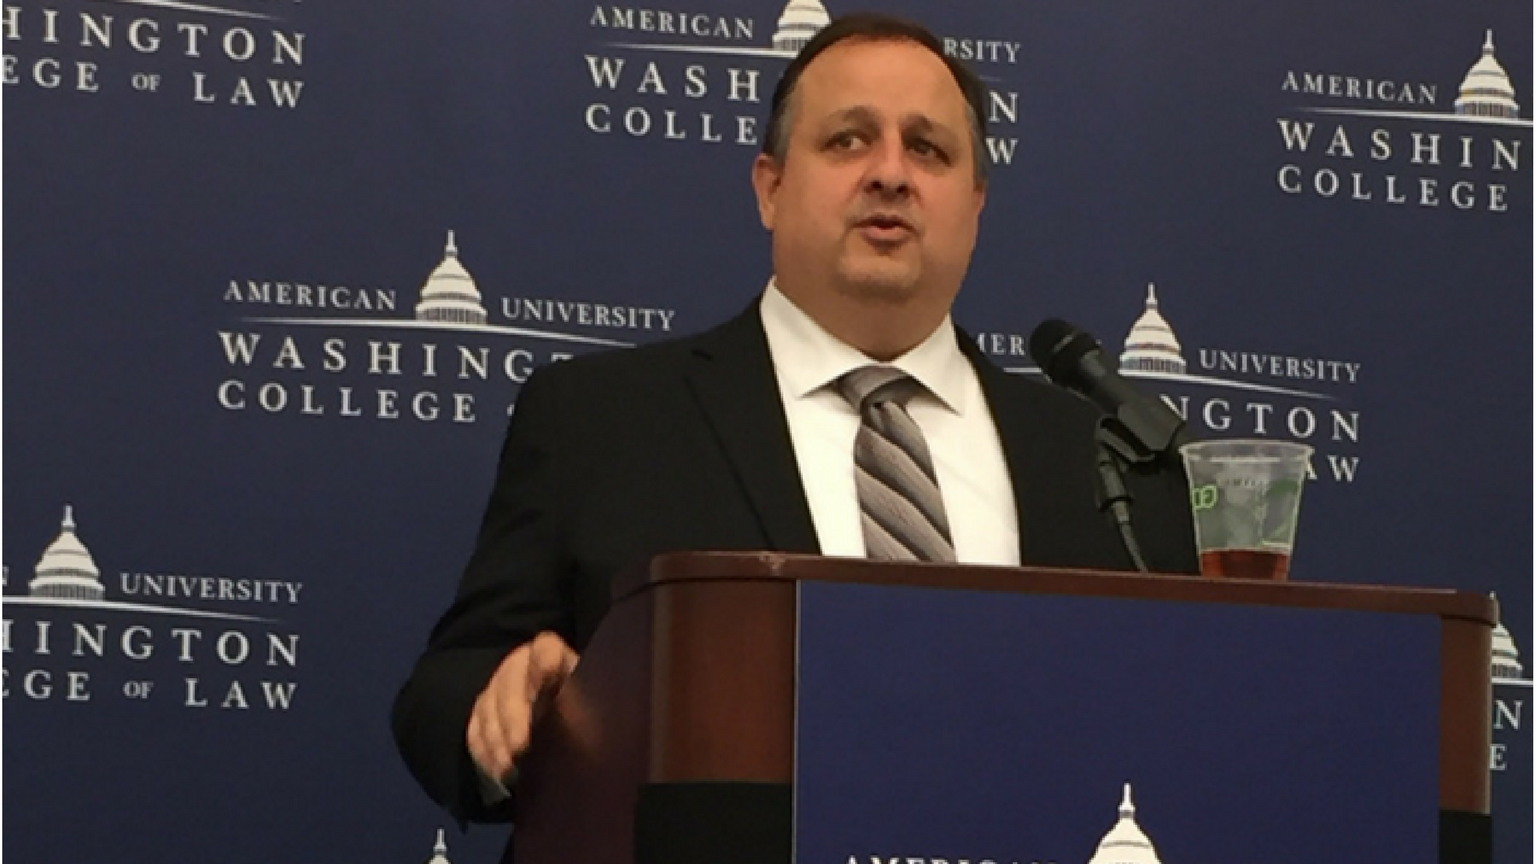 Former Director of the Office of Government Ethics Walter Shaub Lays Out "An Ethics Agenda for 2018"